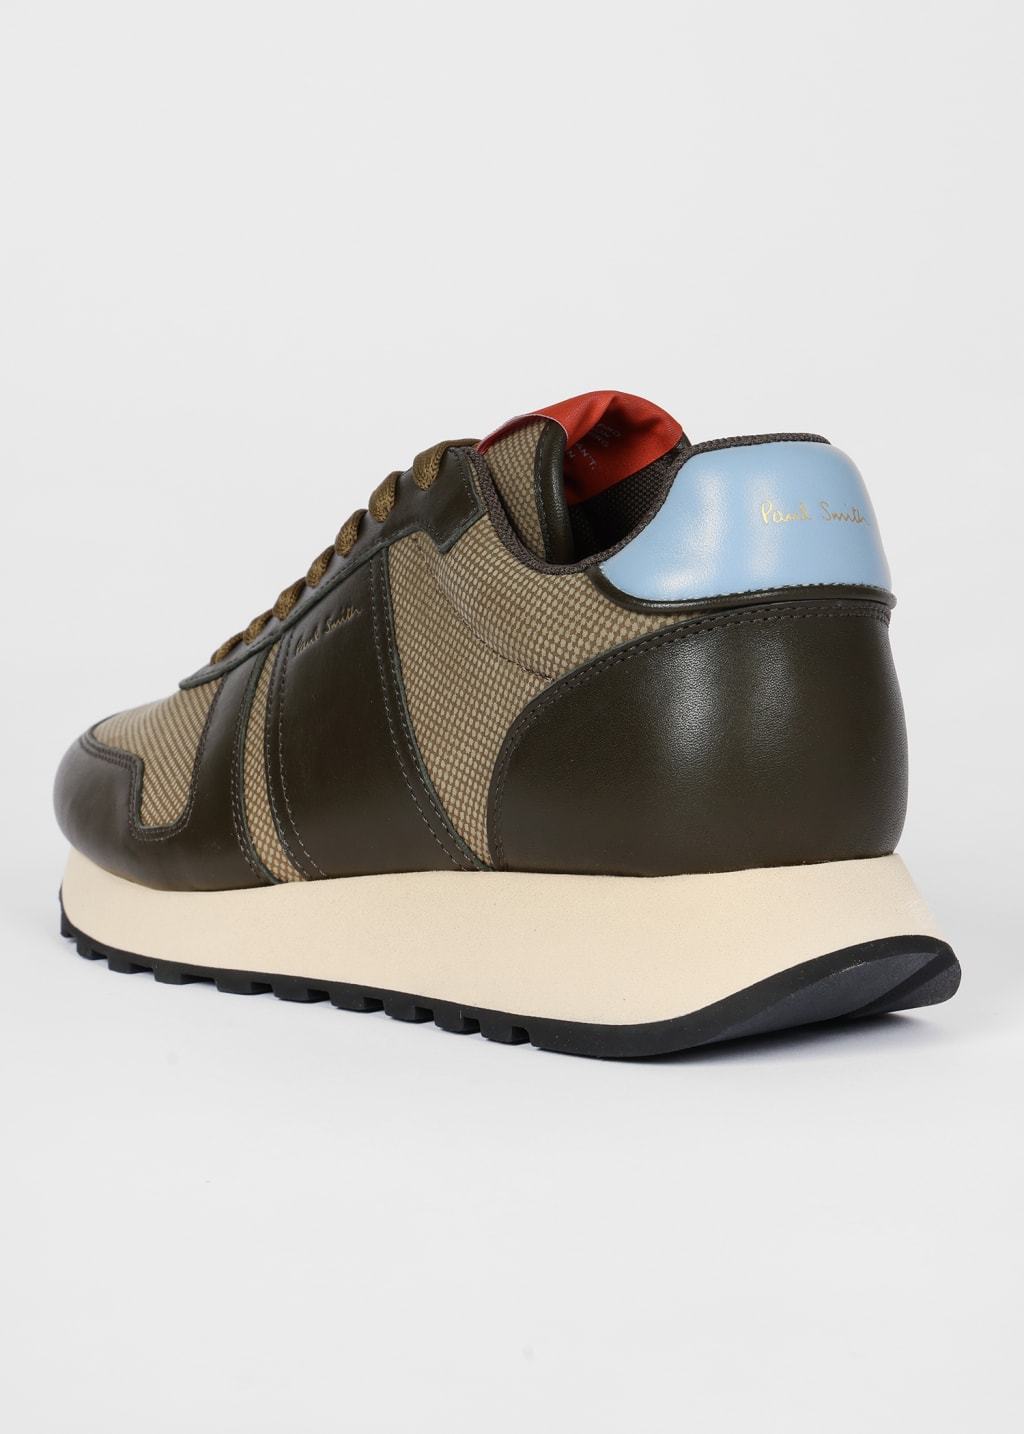 Detail View - Khaki Leather 'Eighties' Trainers Paul Smith